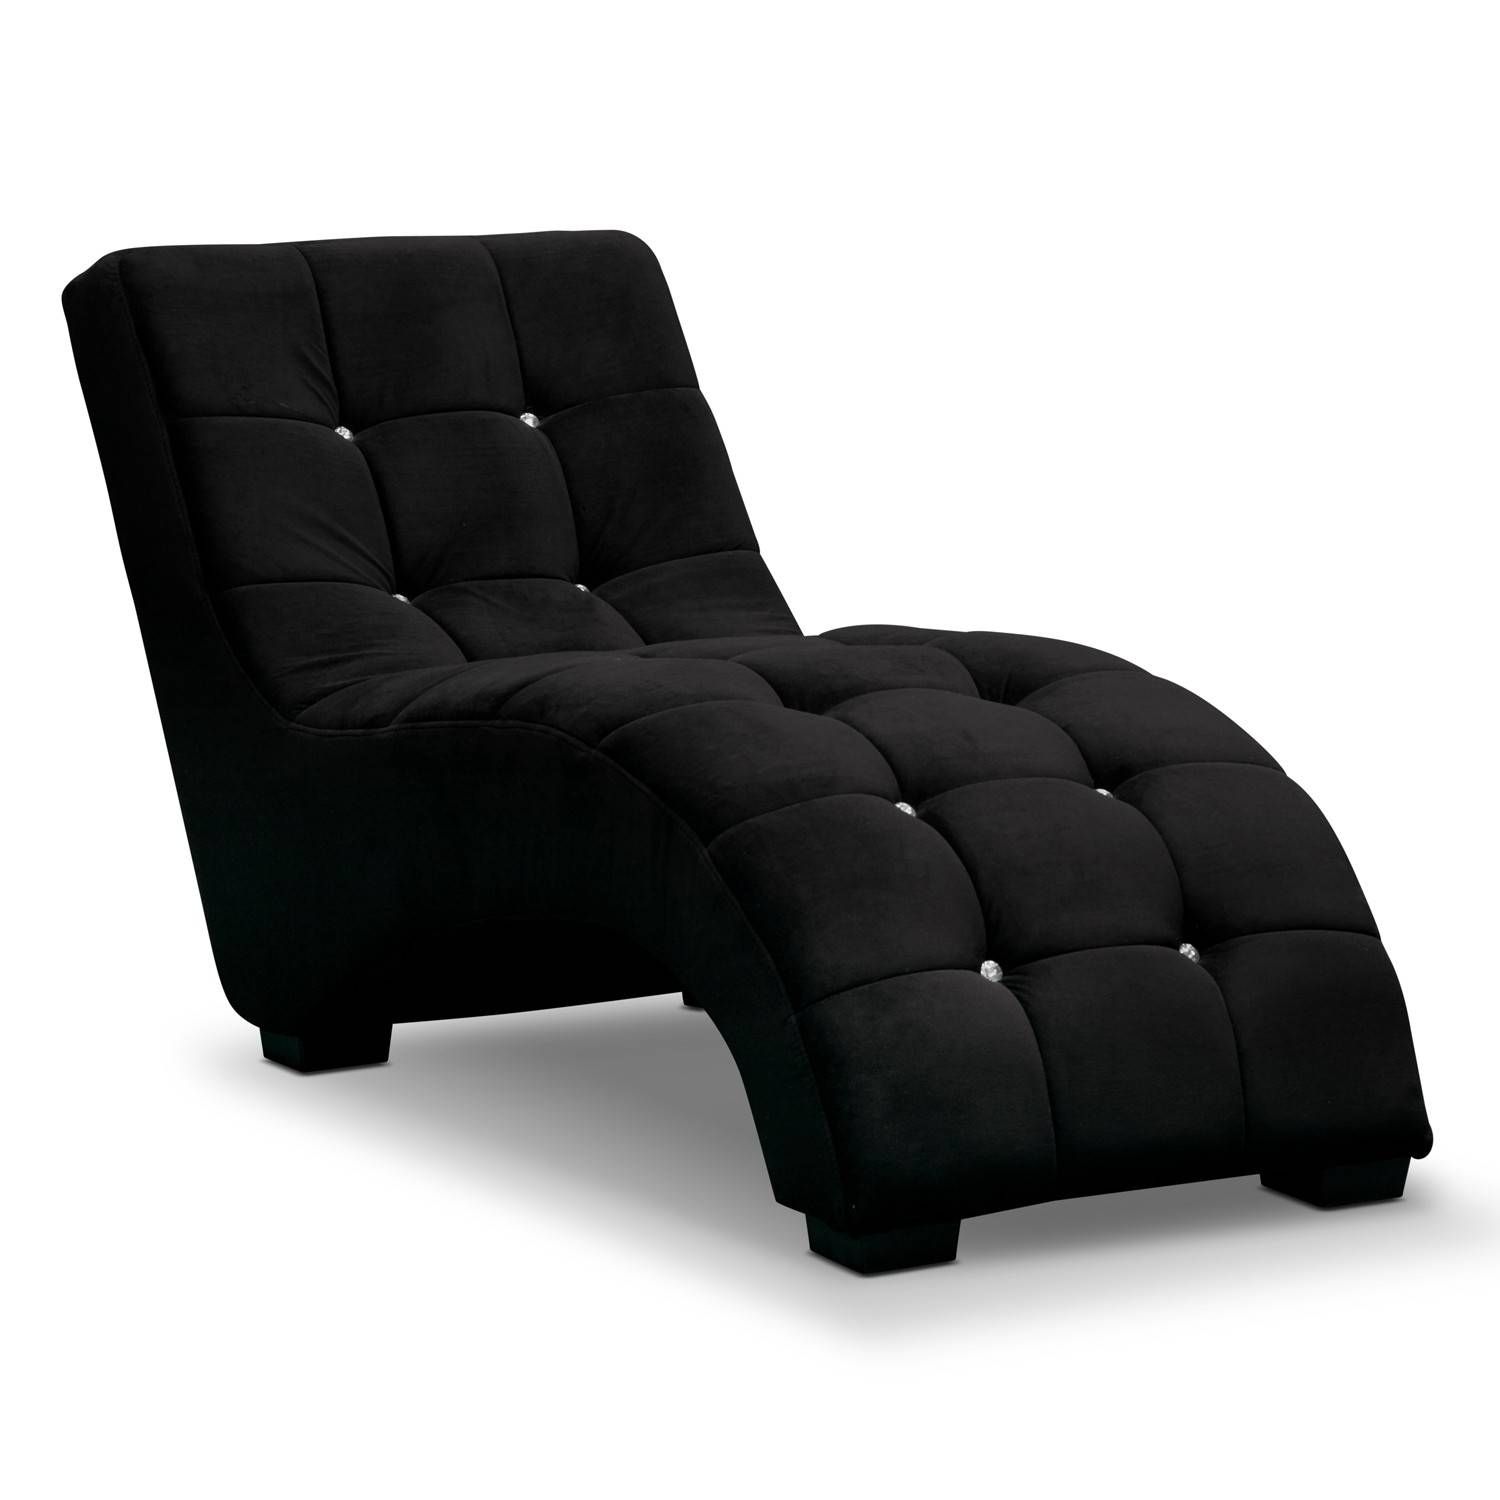 Surprising Lounge Sofa Chair In Styles Of Chairs With Additional With Regard To Lounge Sofas And Chairs (Photo 10 of 12)